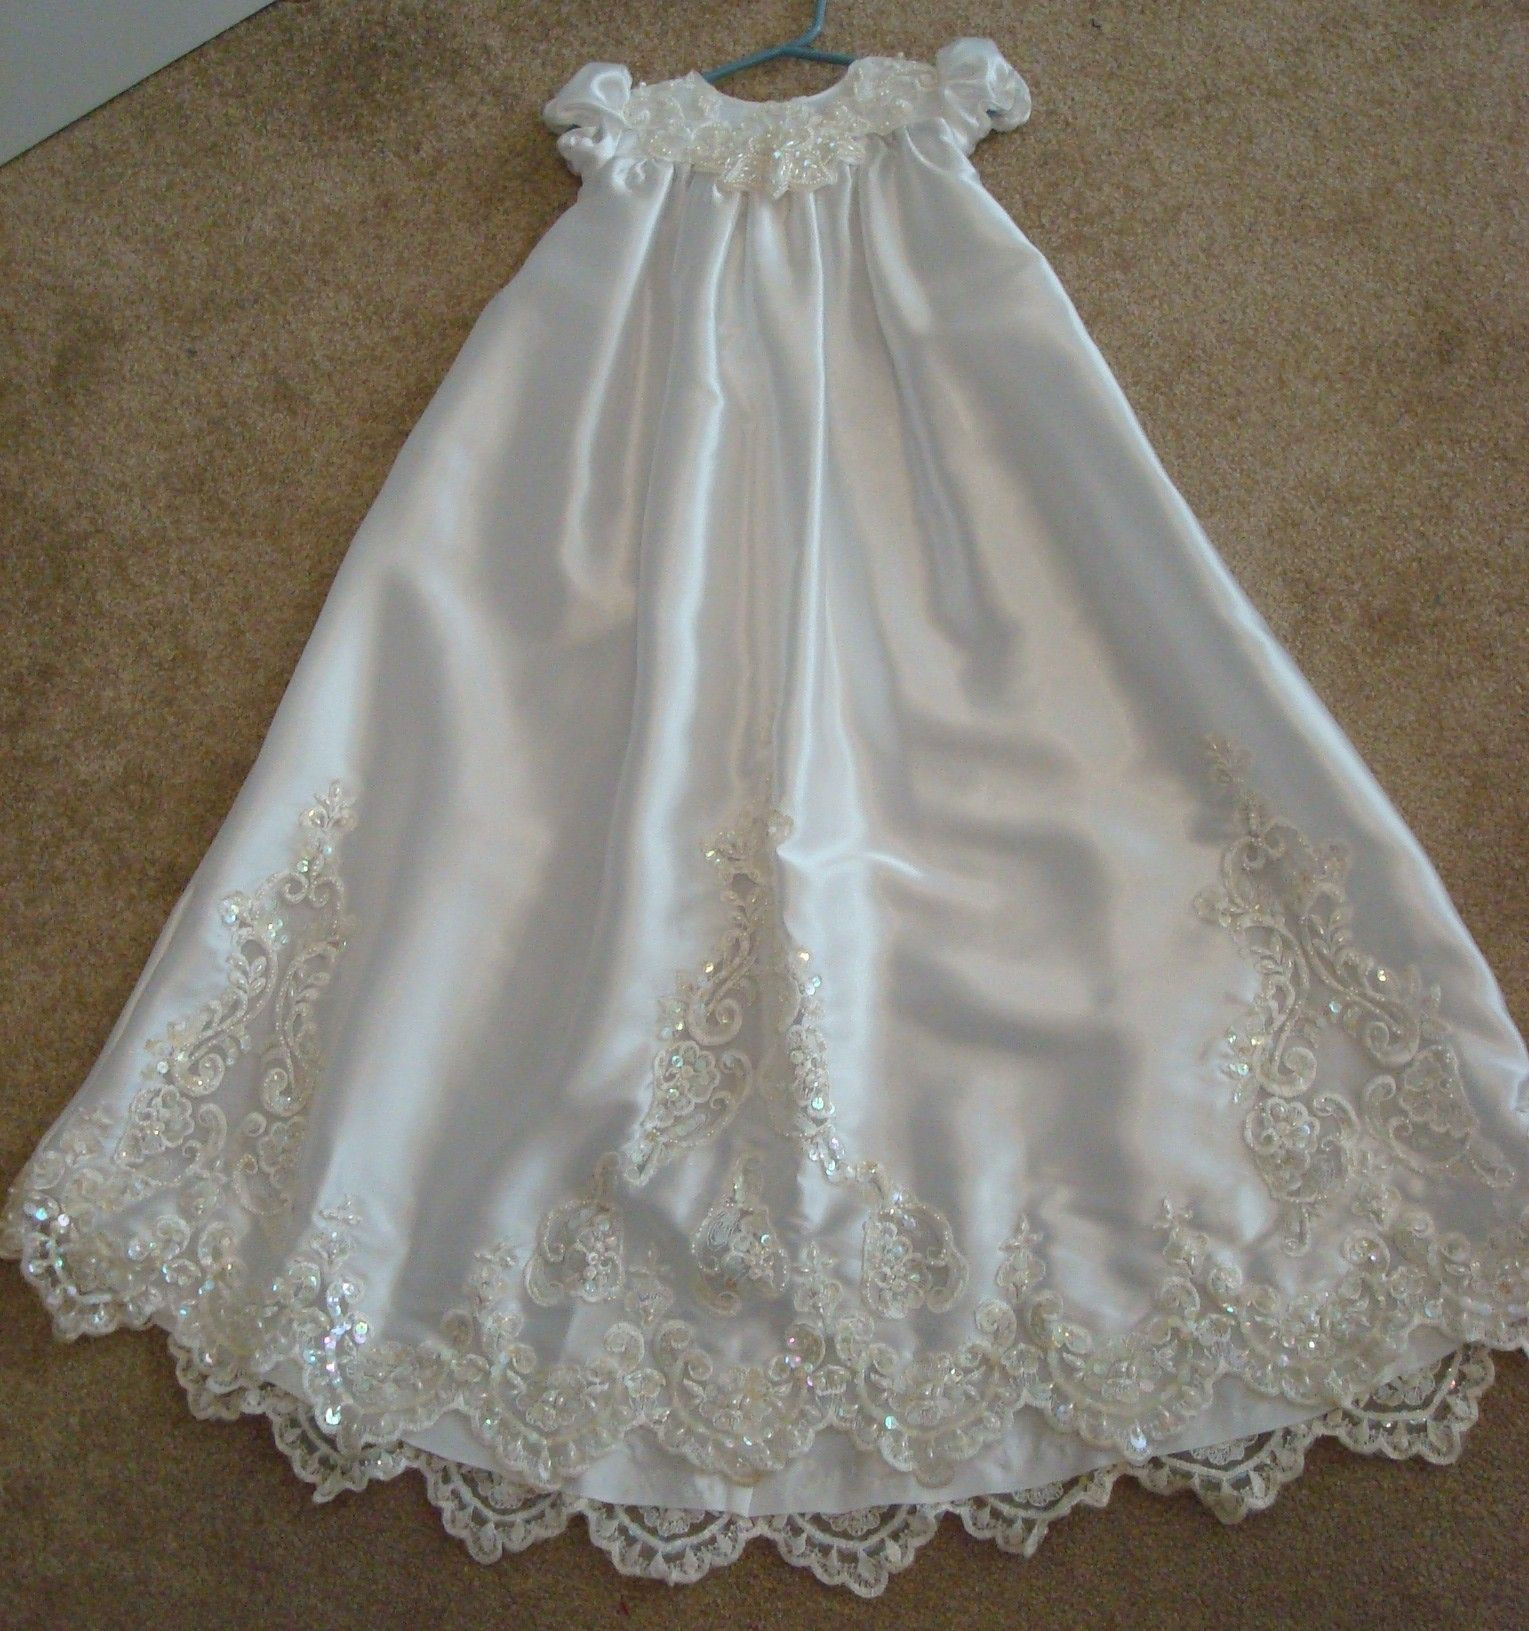 Christening Gown From Wedding Dress
 Christening gown from upcycled wedding dress